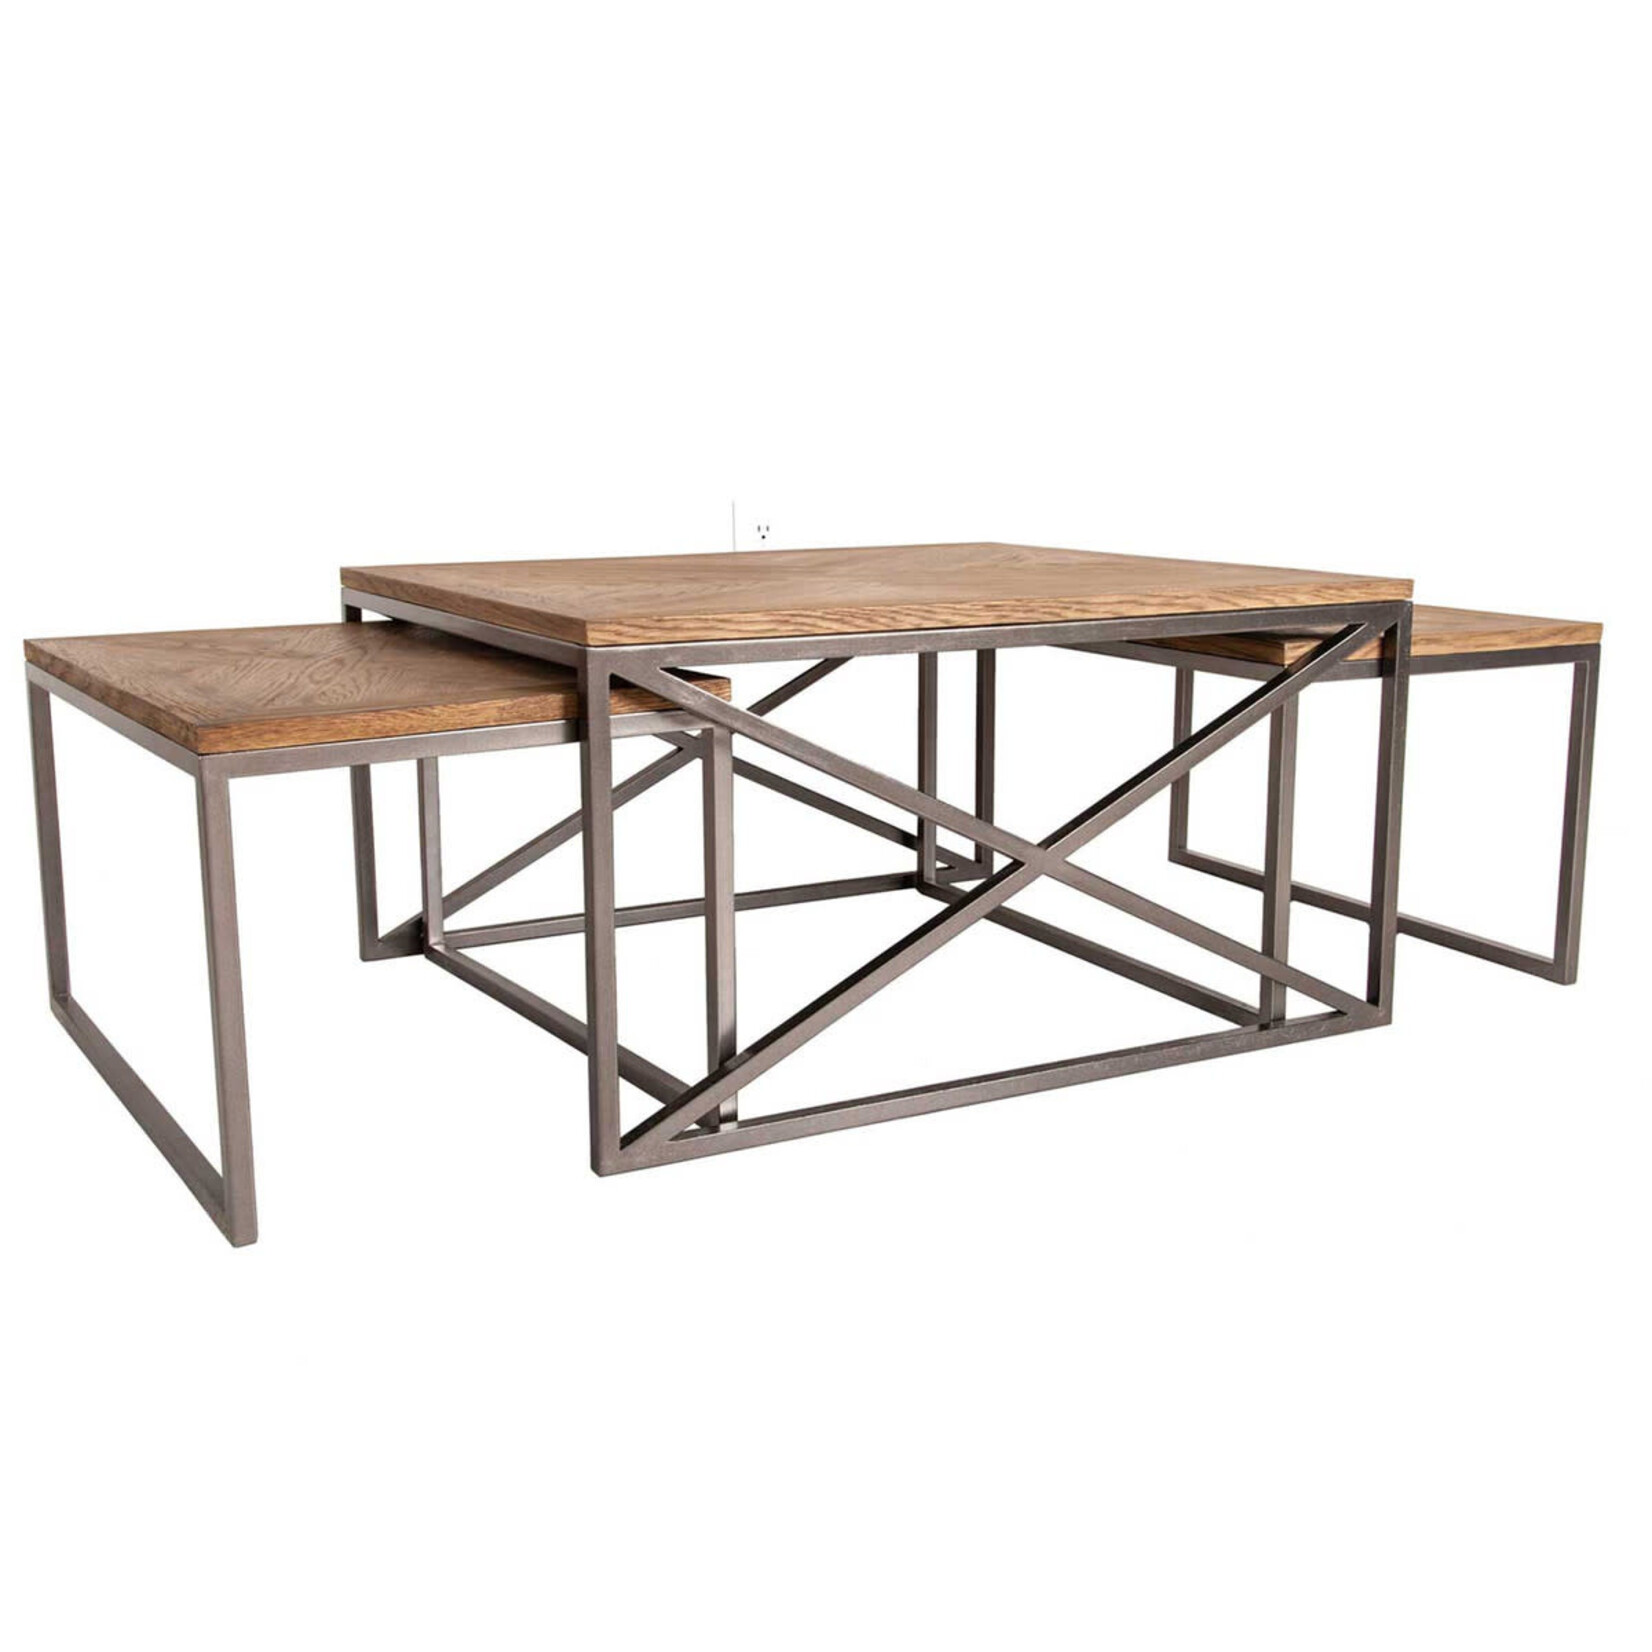 Mickler & Co. Iron & Wood Coffee Table Set